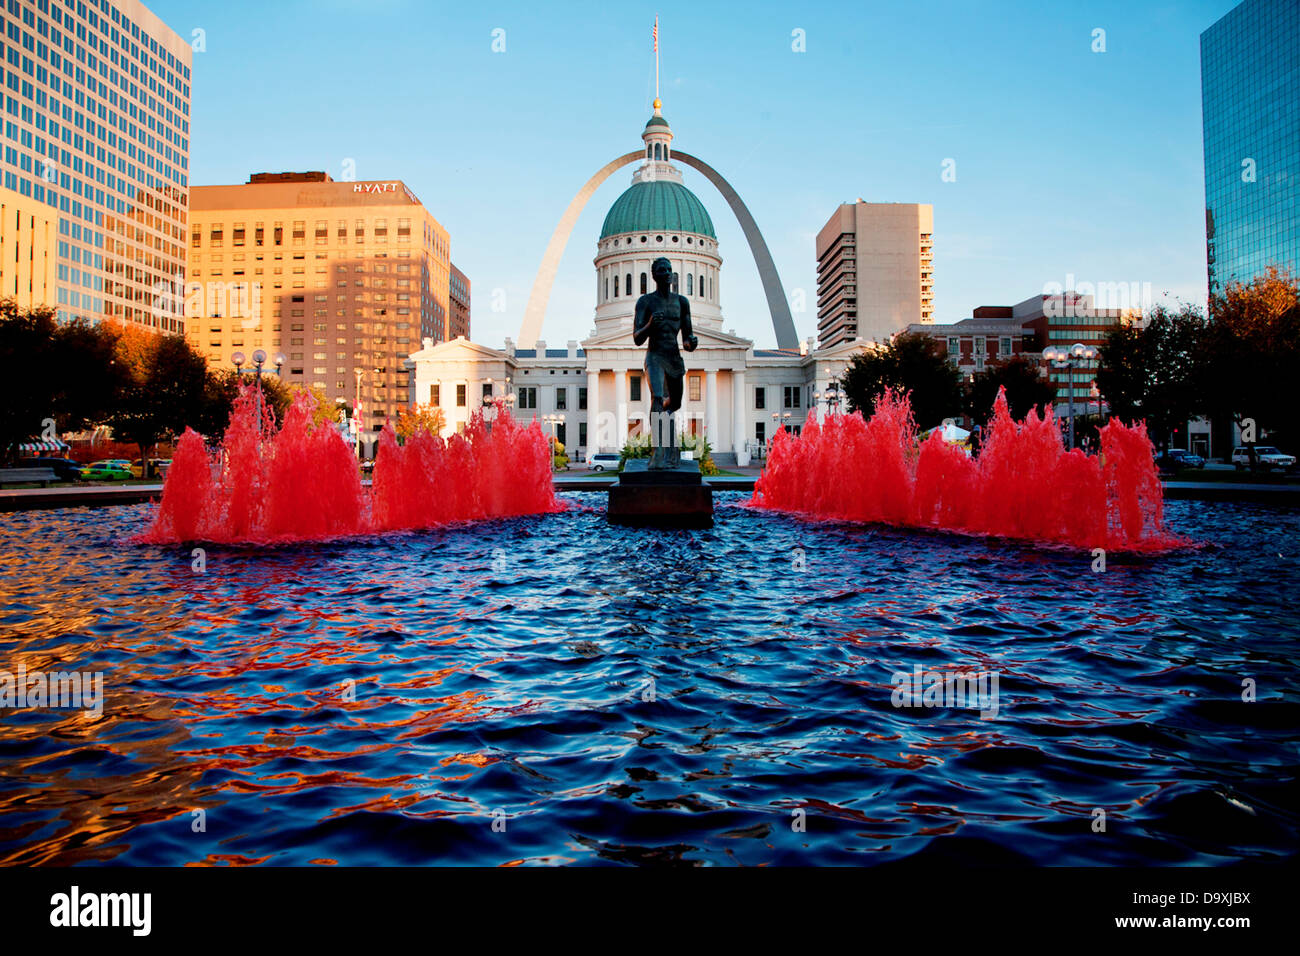 The historic Old Courthouse site Dred Scott decision in downtown St Louis Mo Has fountains running red during 2011 World Series Stock Photo